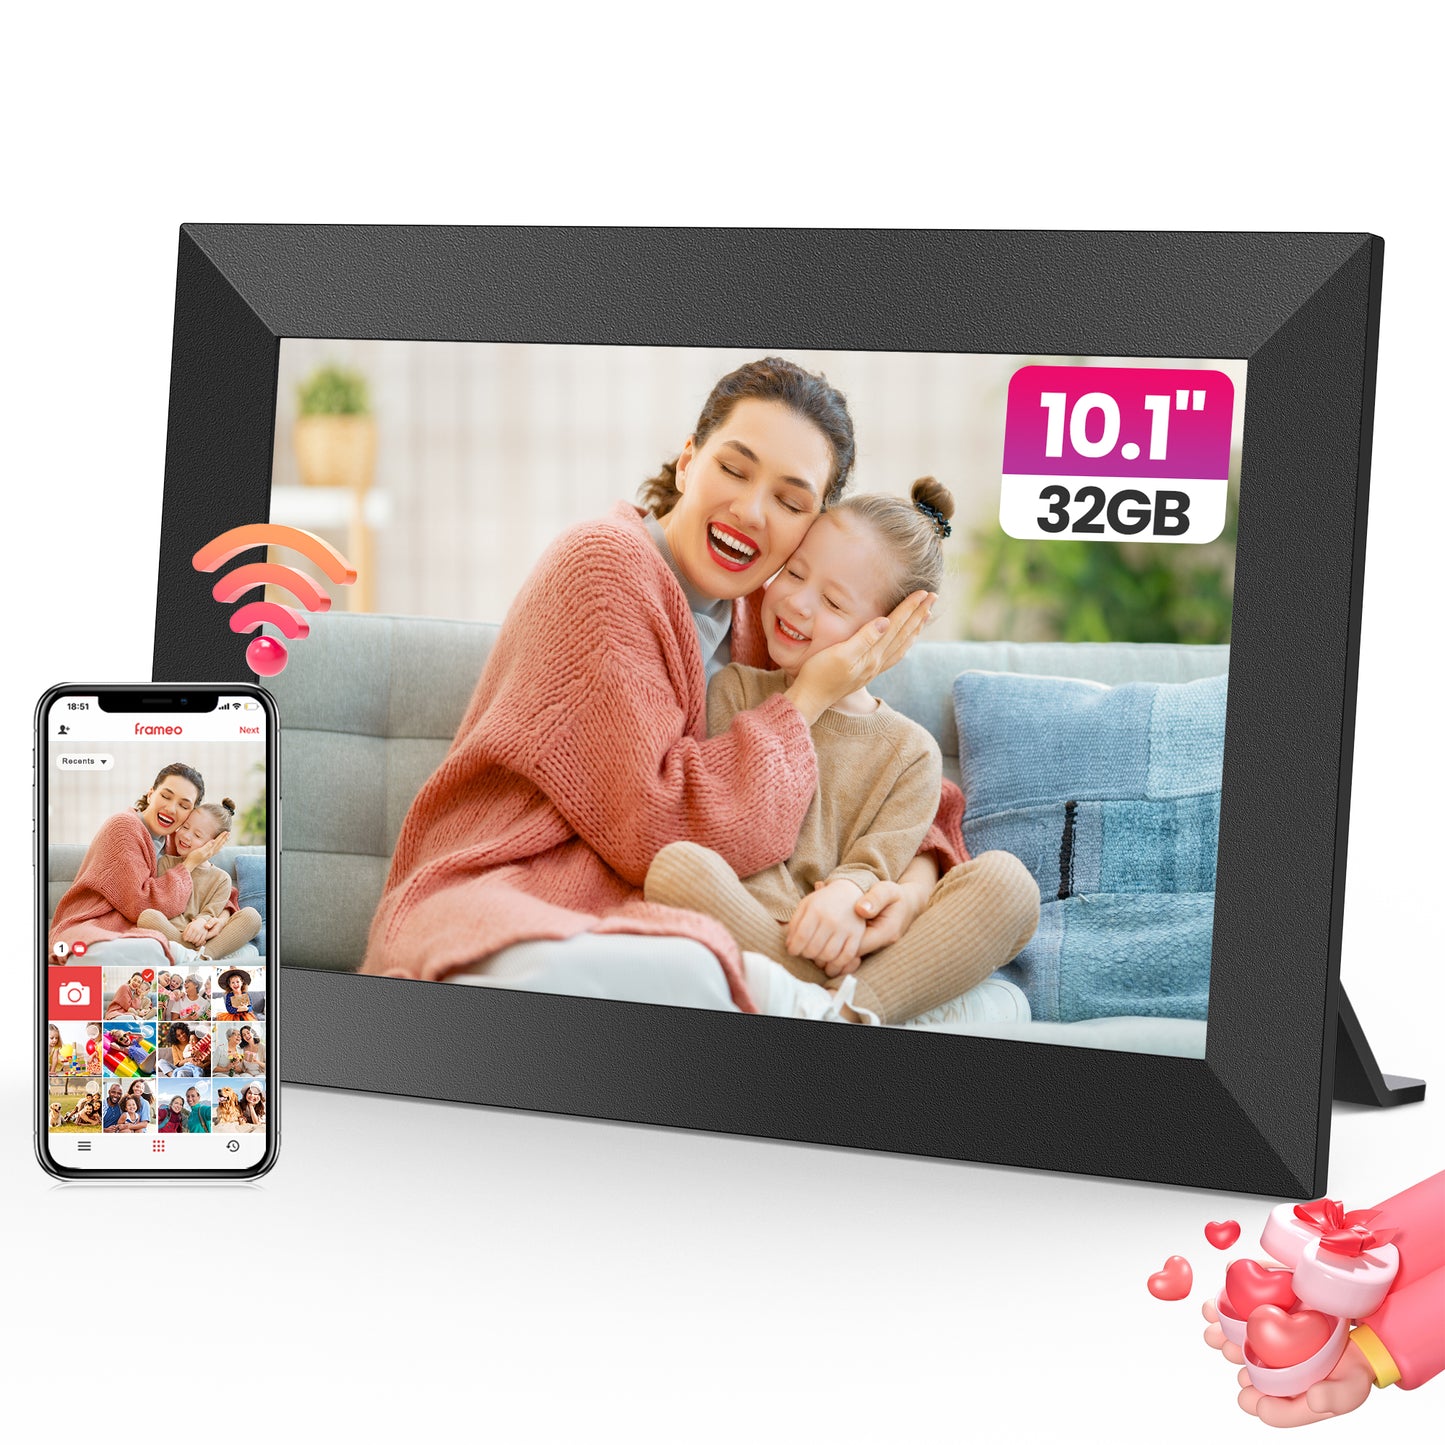 RICILAR Frameo WiFi Digital Picture Frame, 10.1-inch Electronic Photo Frame with IPS Touch Screen, 32GB Storage, Auto-Rotate, Wall Mountable, Ideal Gift Selection!